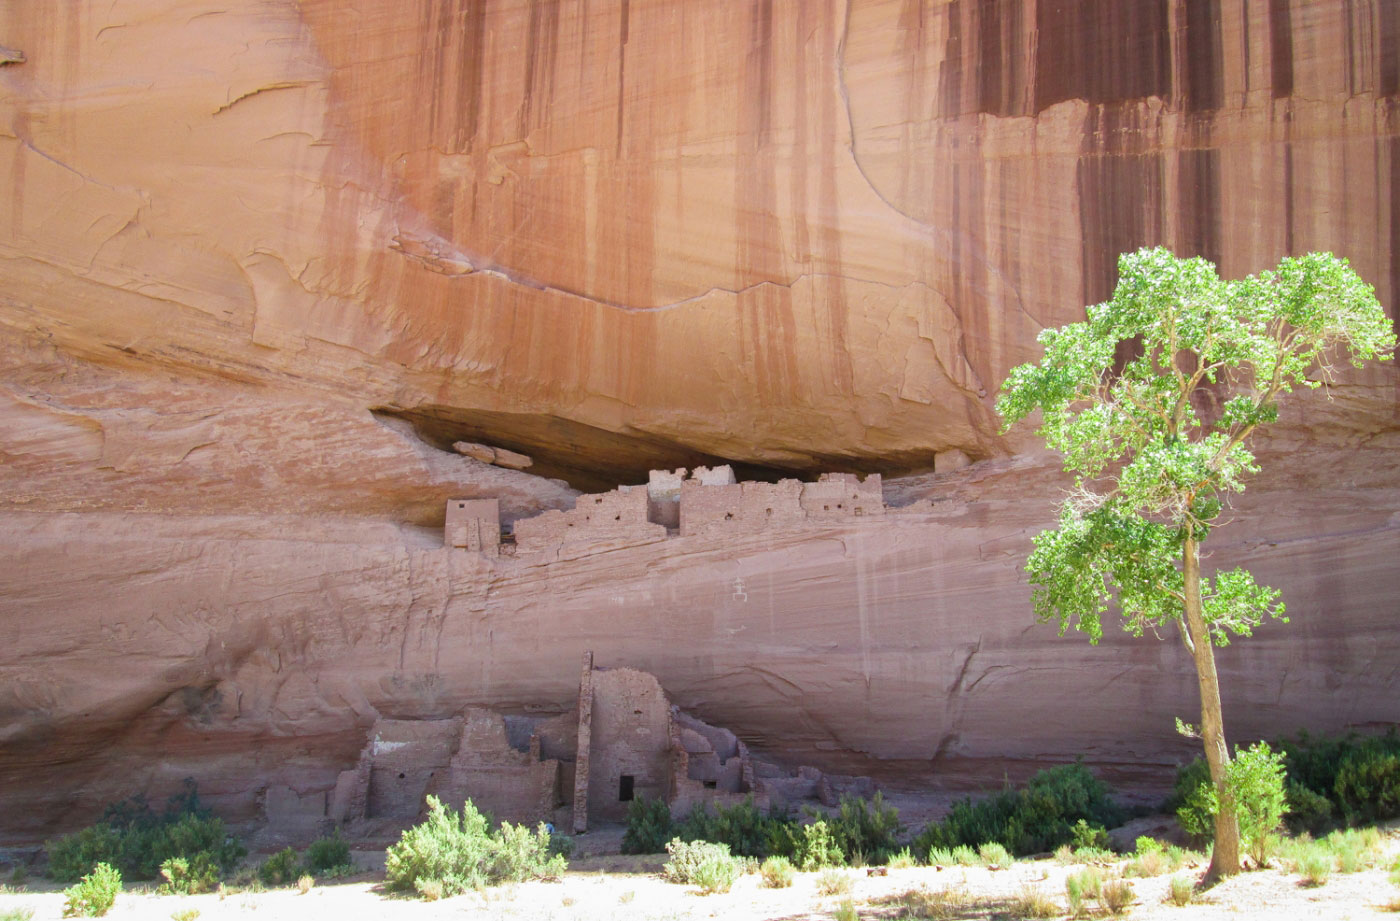 Hike White House Ruin Trail in Canyon de Chelly National Monument, Arizona - Stav is Lost